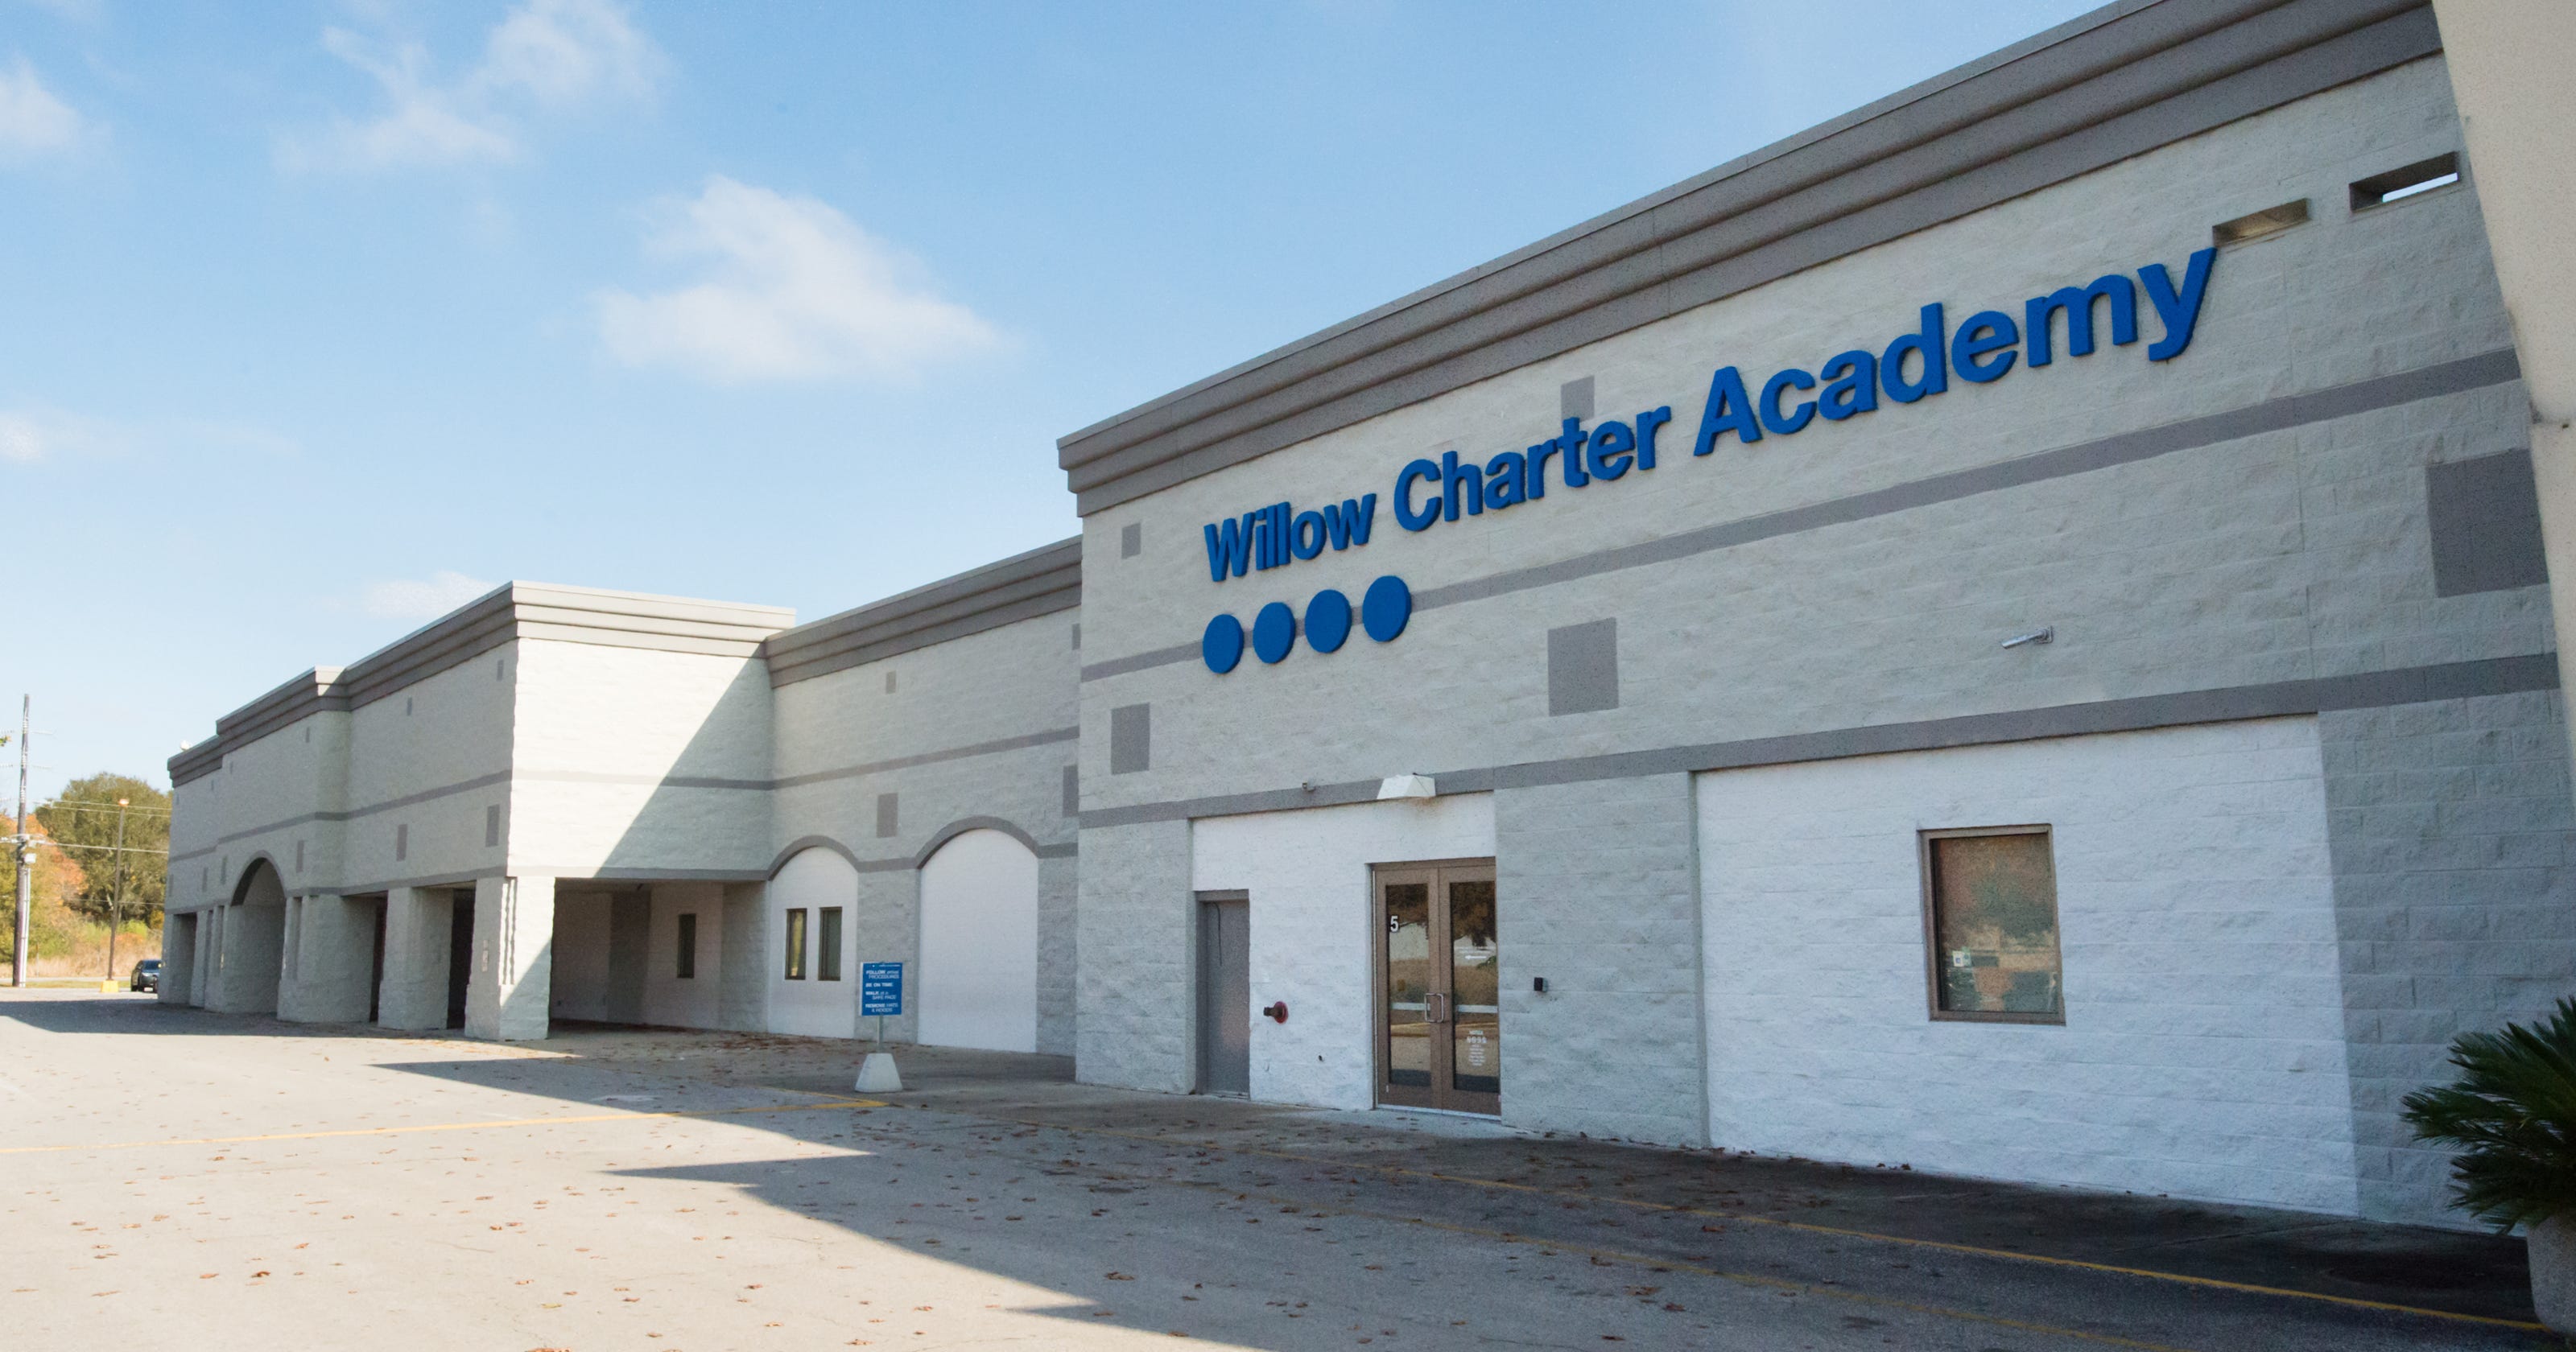 Improvements seen at Willow Charter Academy